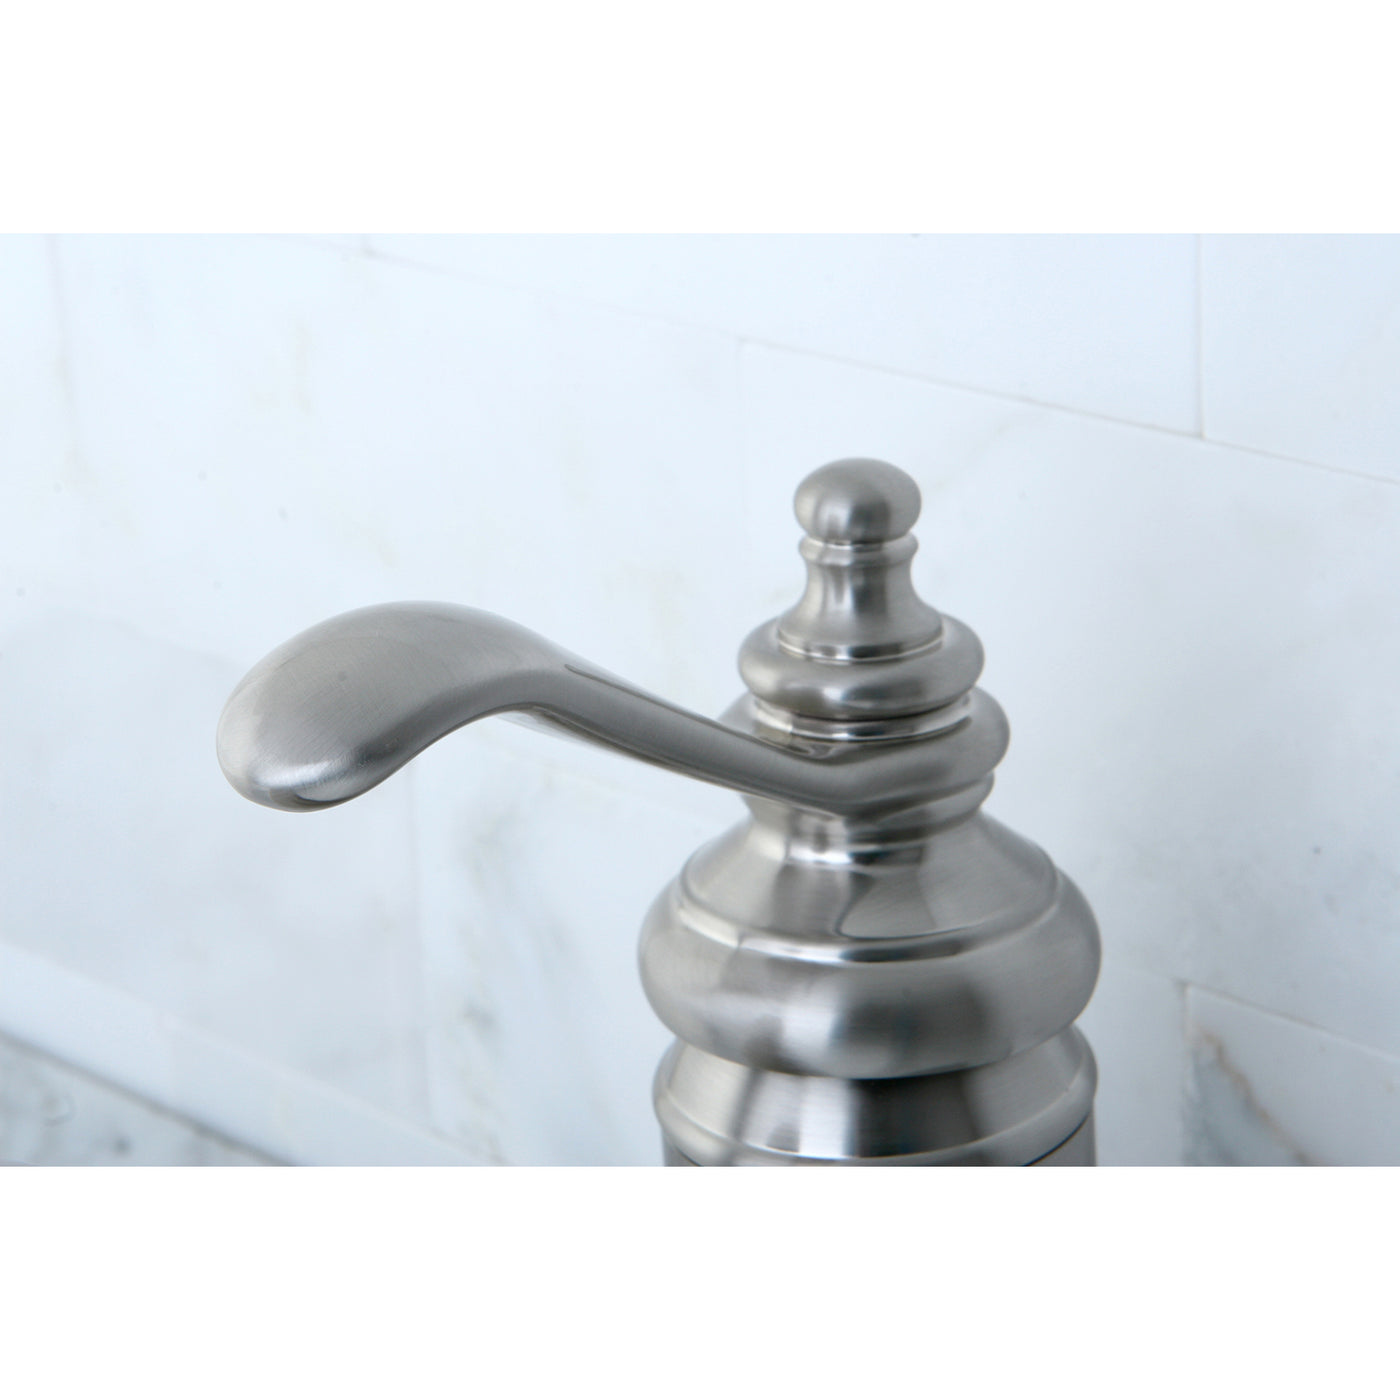 Elements of Design ES3408TL Single-Handle Bathroom Faucet with Push Pop-Up, Brushed Nickel